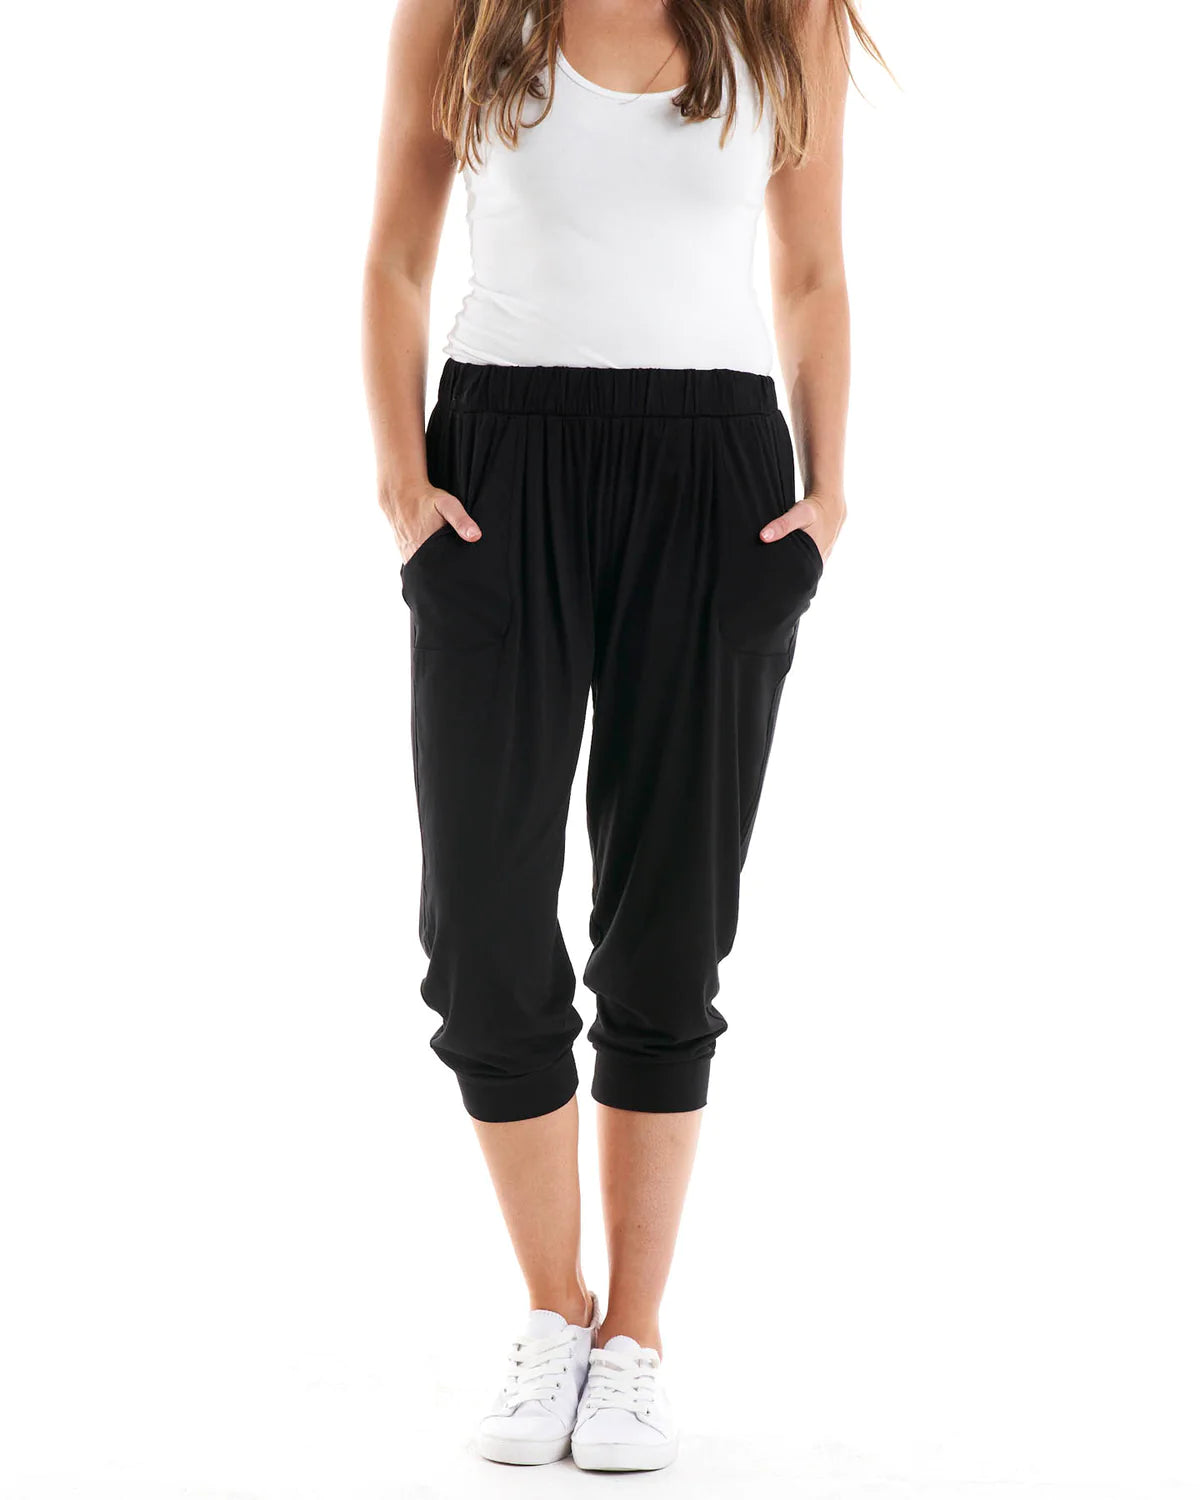 Tokyo 3/4 Pants: A classic Betty Basics style, the Tokyo 3/4 Pant is a relaxed style that features an elasticated waistband and side pockets. Simple yet stylish, they are the perfect - Ciao Bella Dresses 